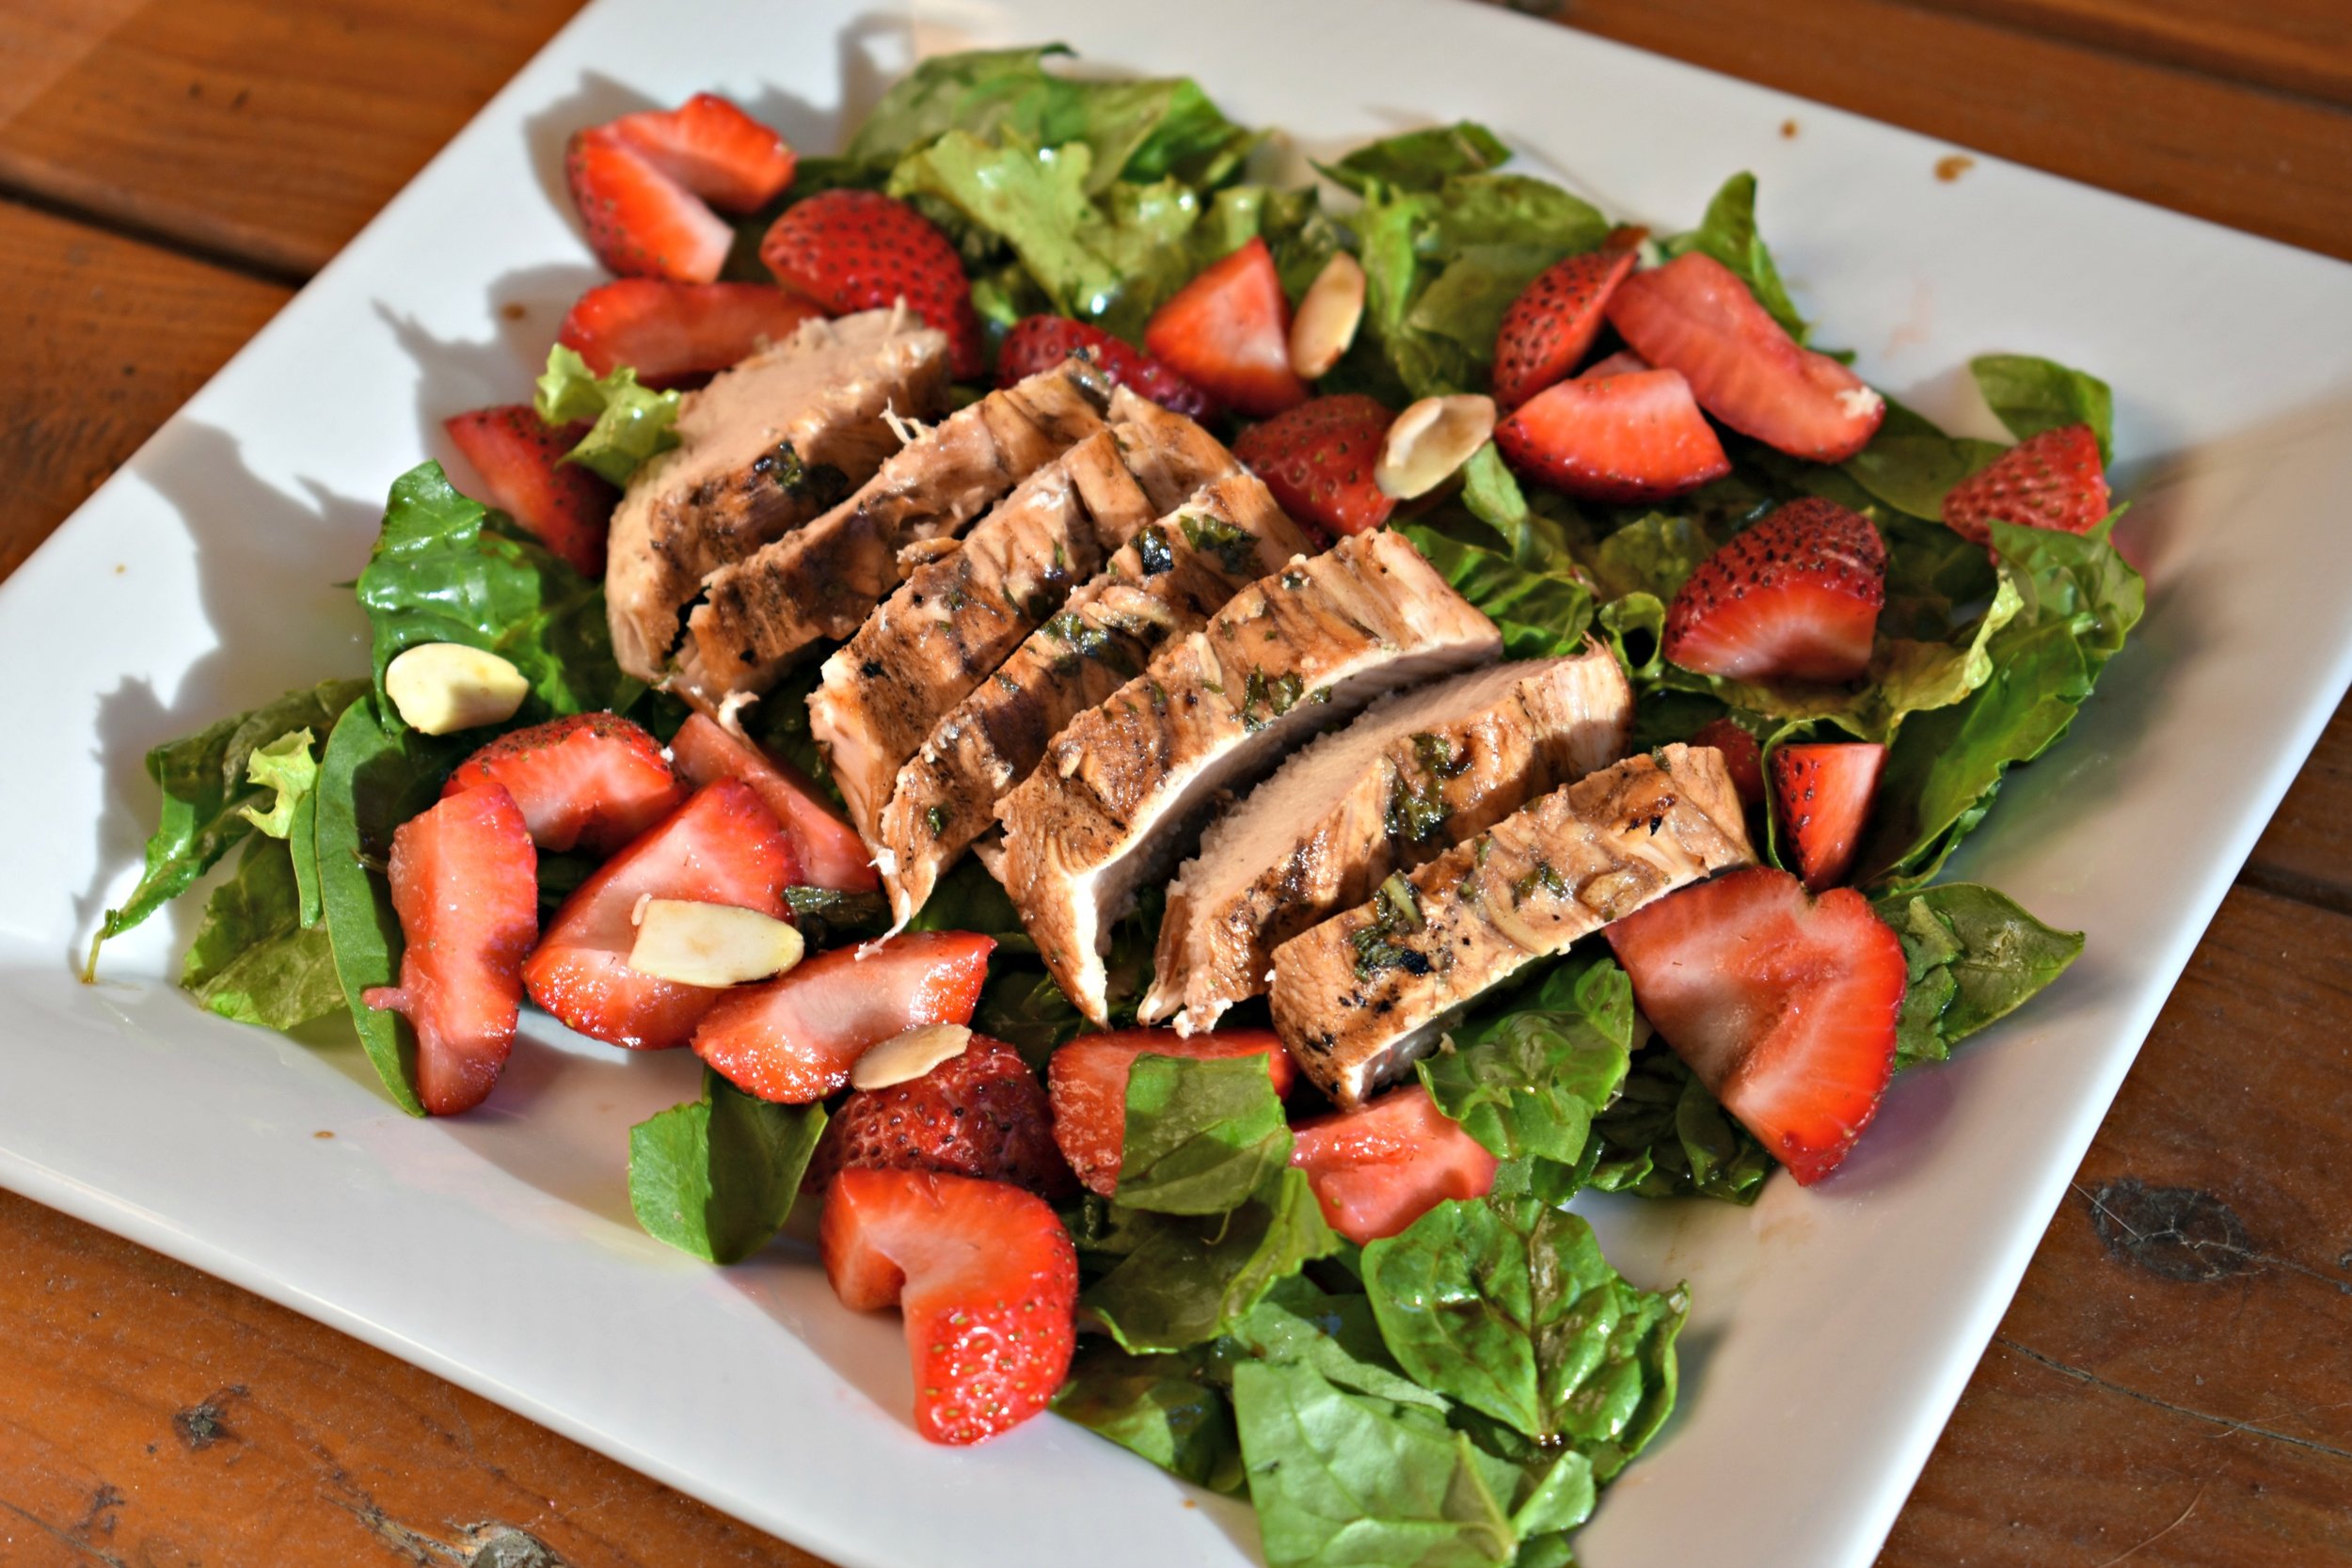 Grilled Chicken Salad With Strawberries and Spinach